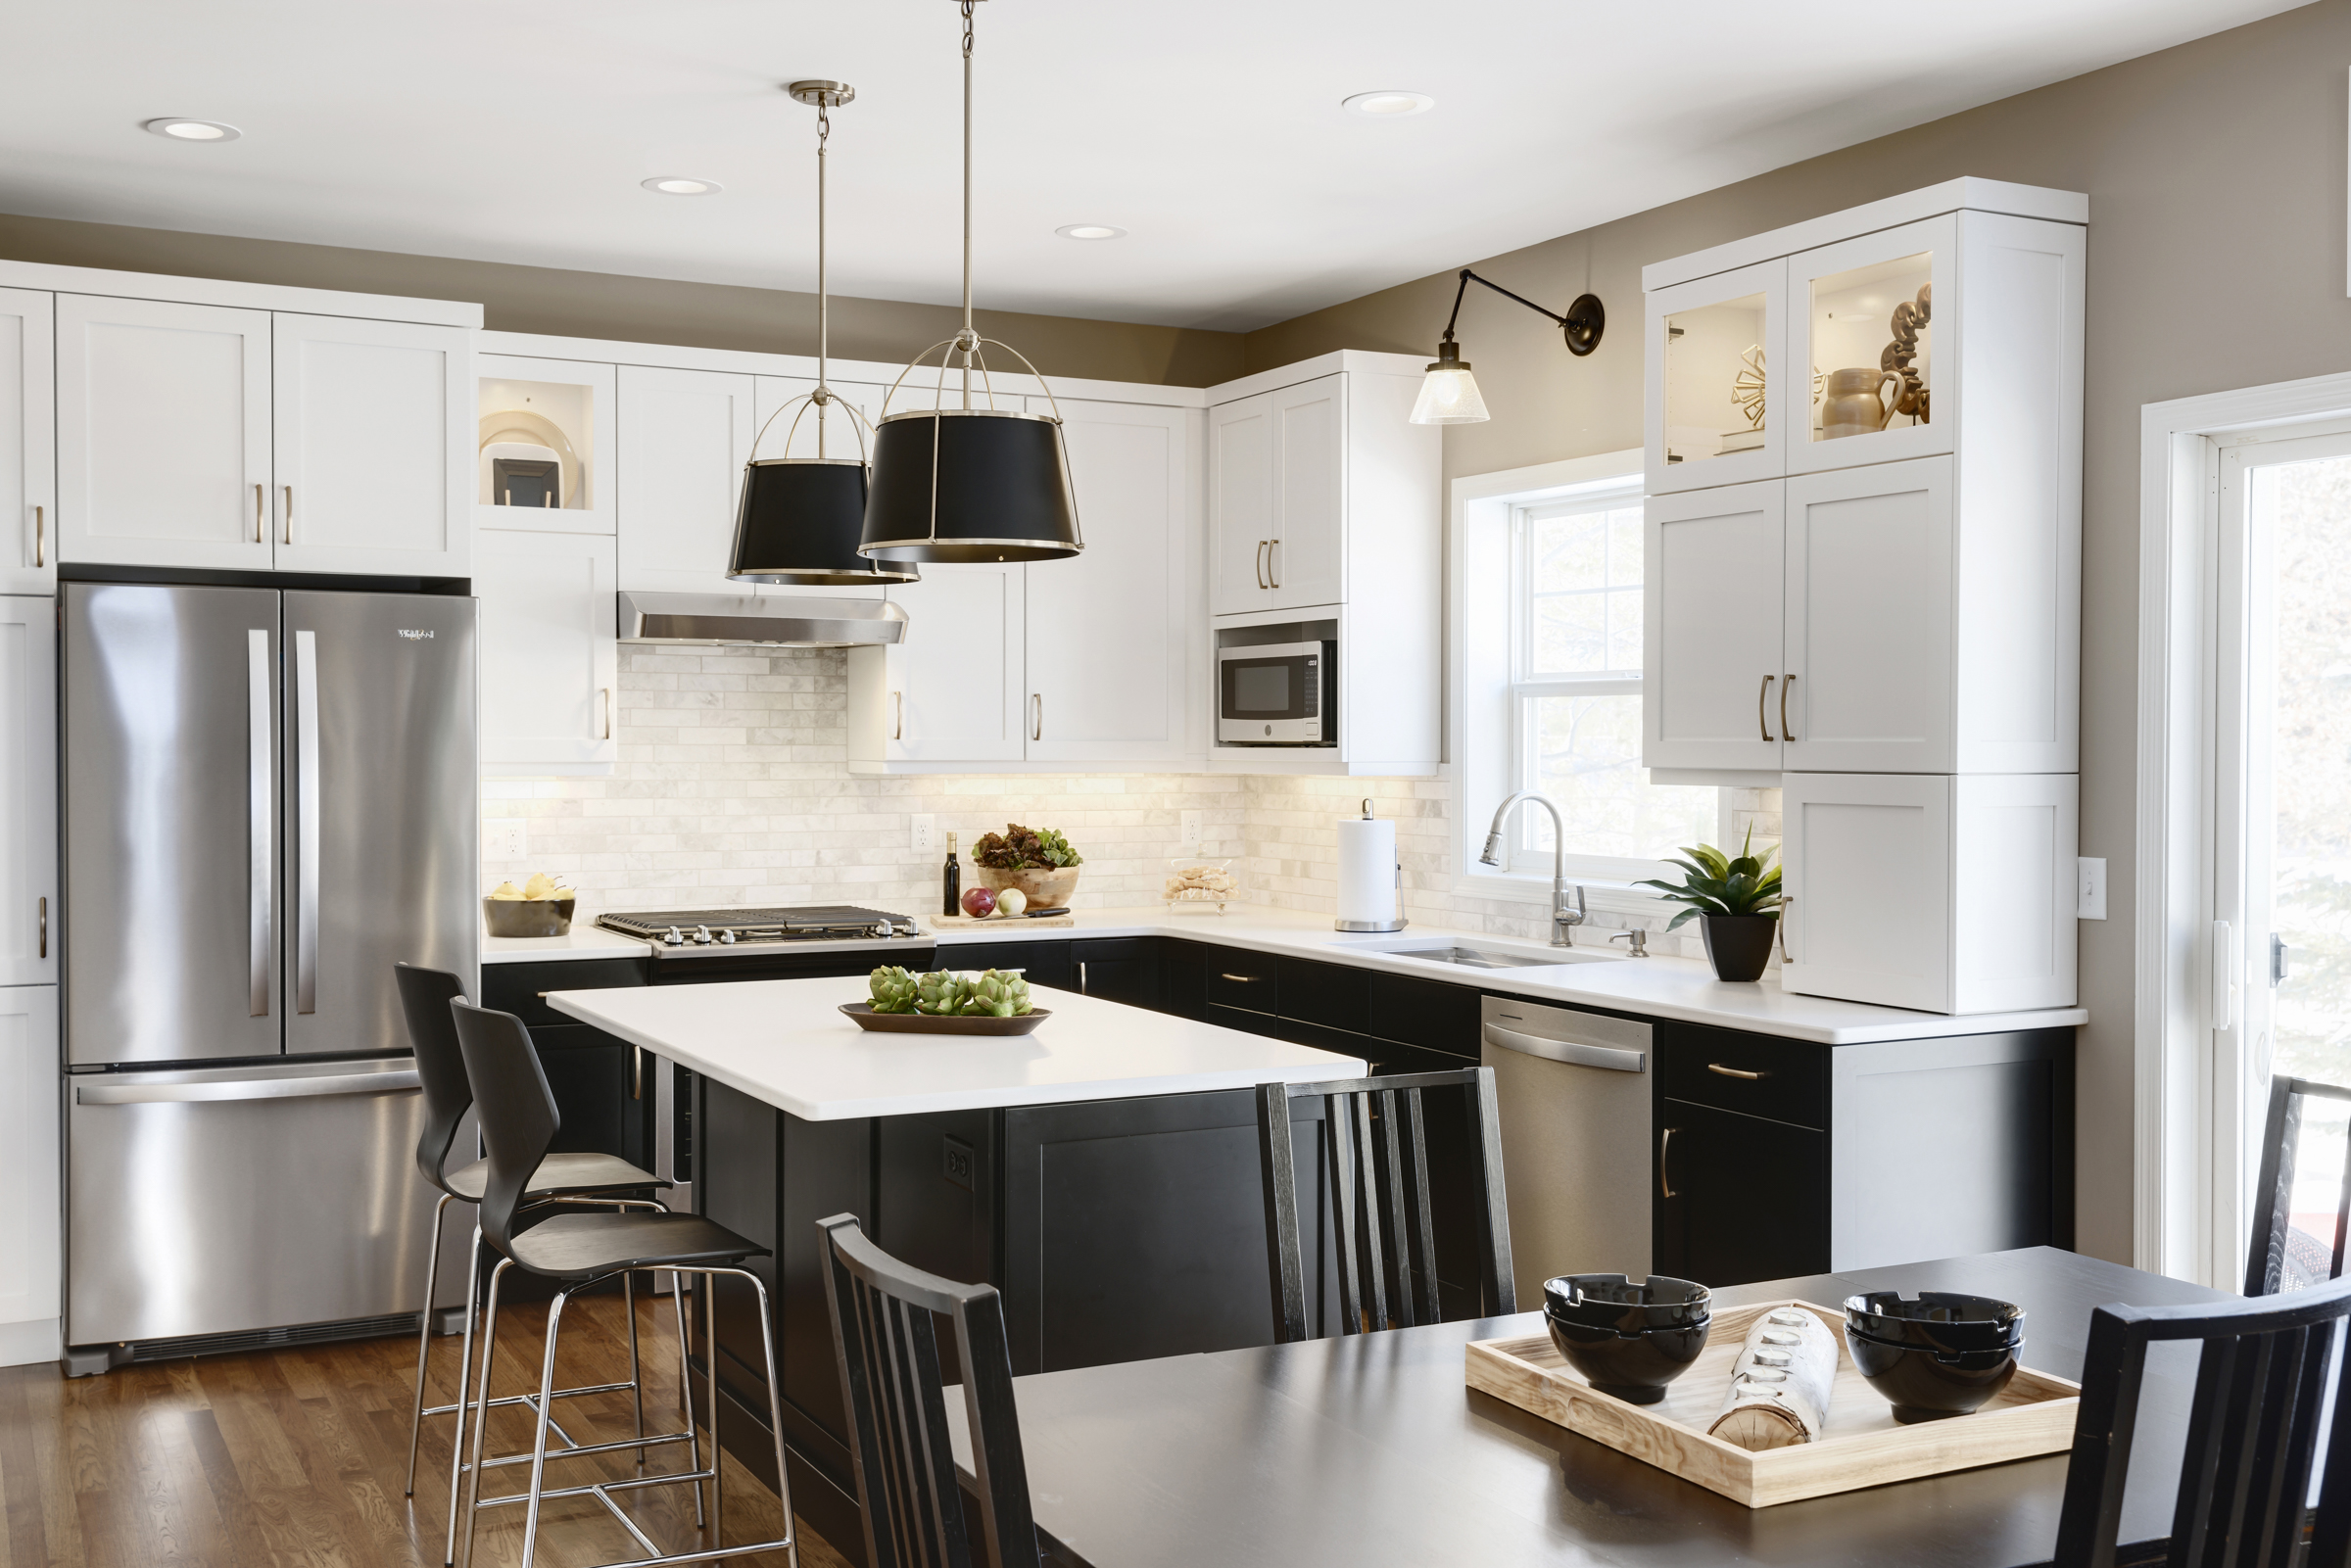 Bold kitchen renovation with black base cabinets, white upper cabinets, wood floor, and large island